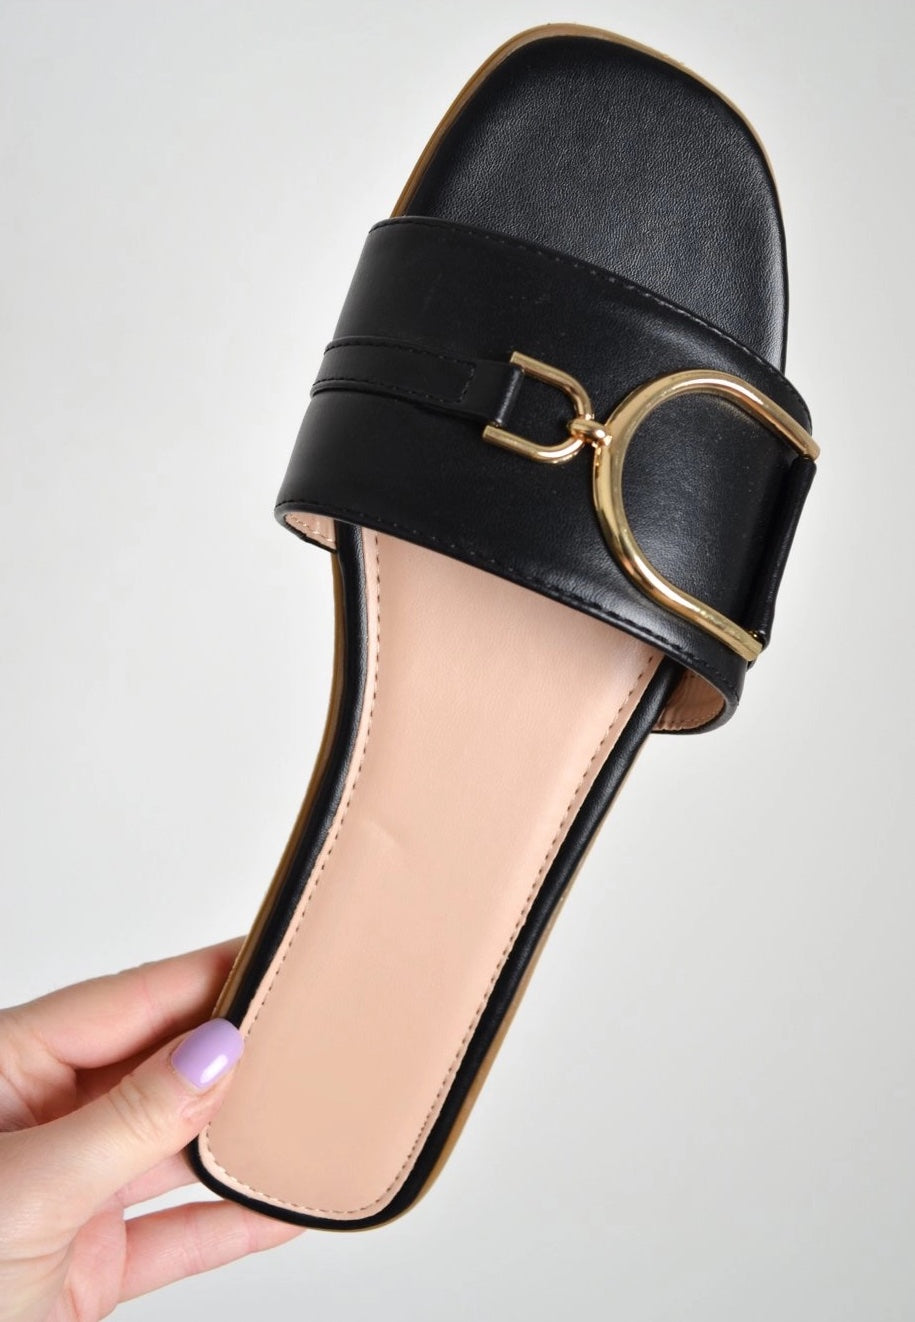 Milly Buckle Slip-On Sandals| Uniquely Claudia Boutique